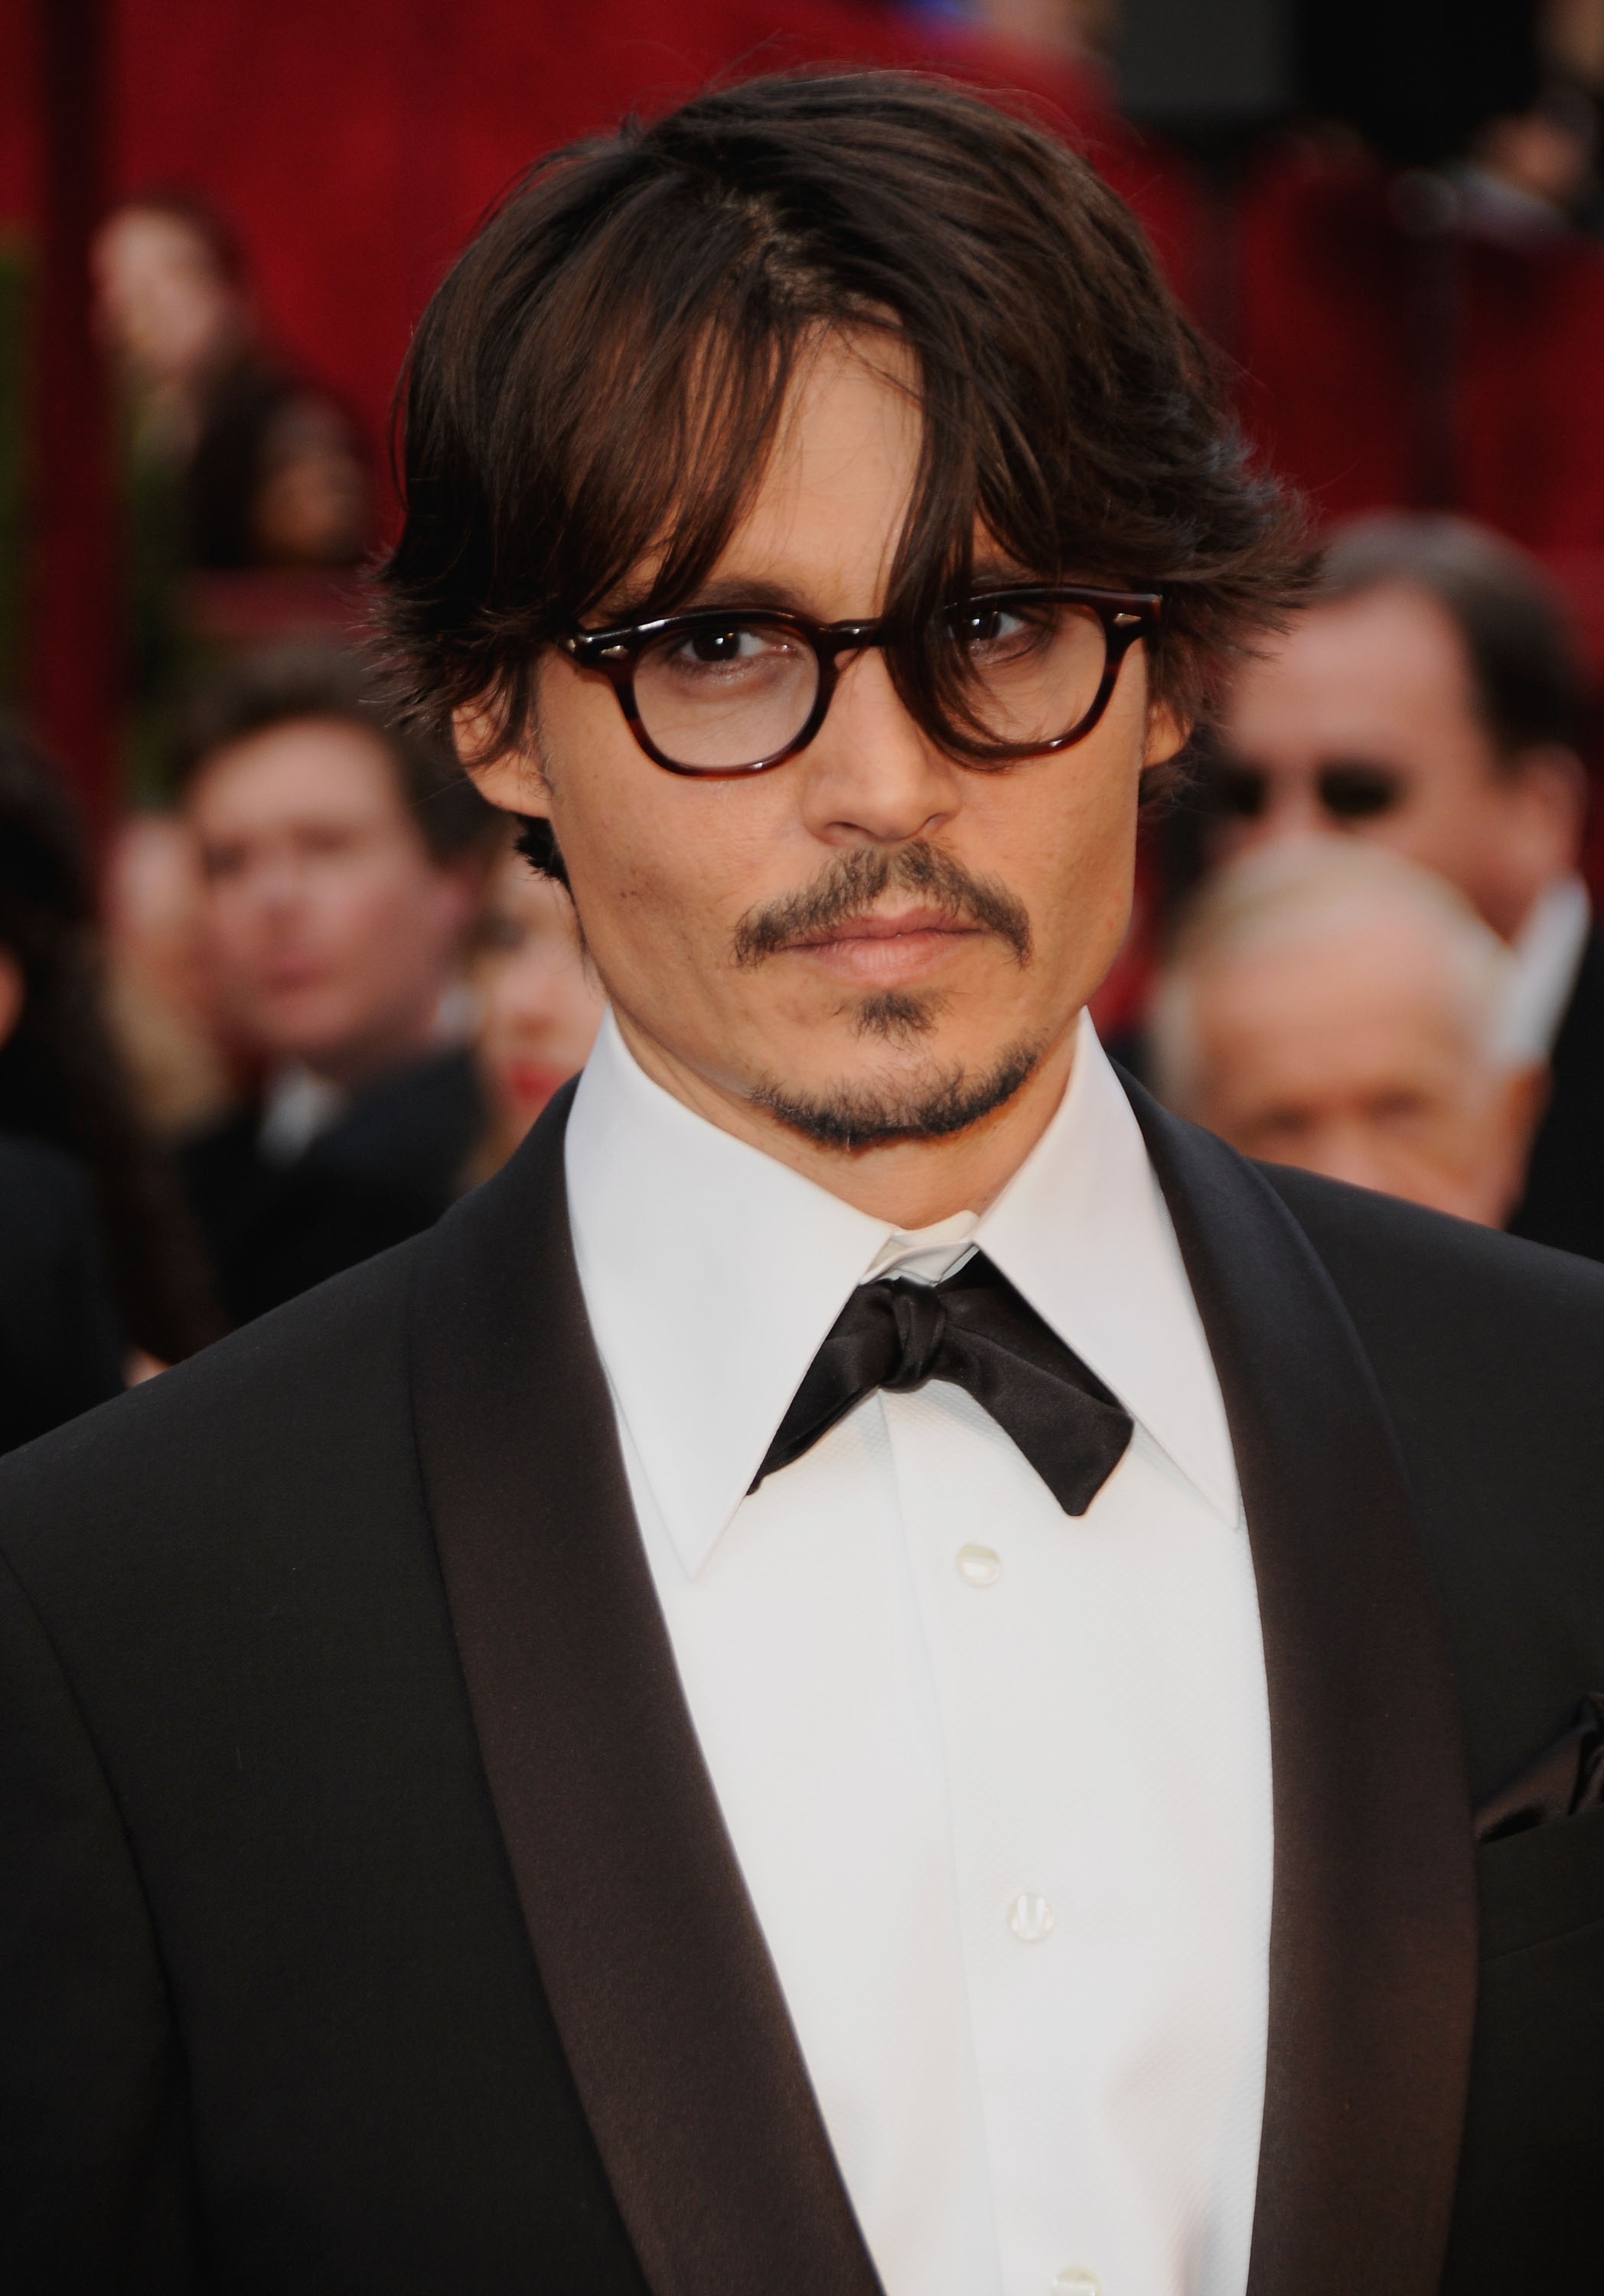 Johnny Depp bei den 80th Annual Academy Awards am 24. Februar 2008 in Hollywood. | Quelle: Getty Images